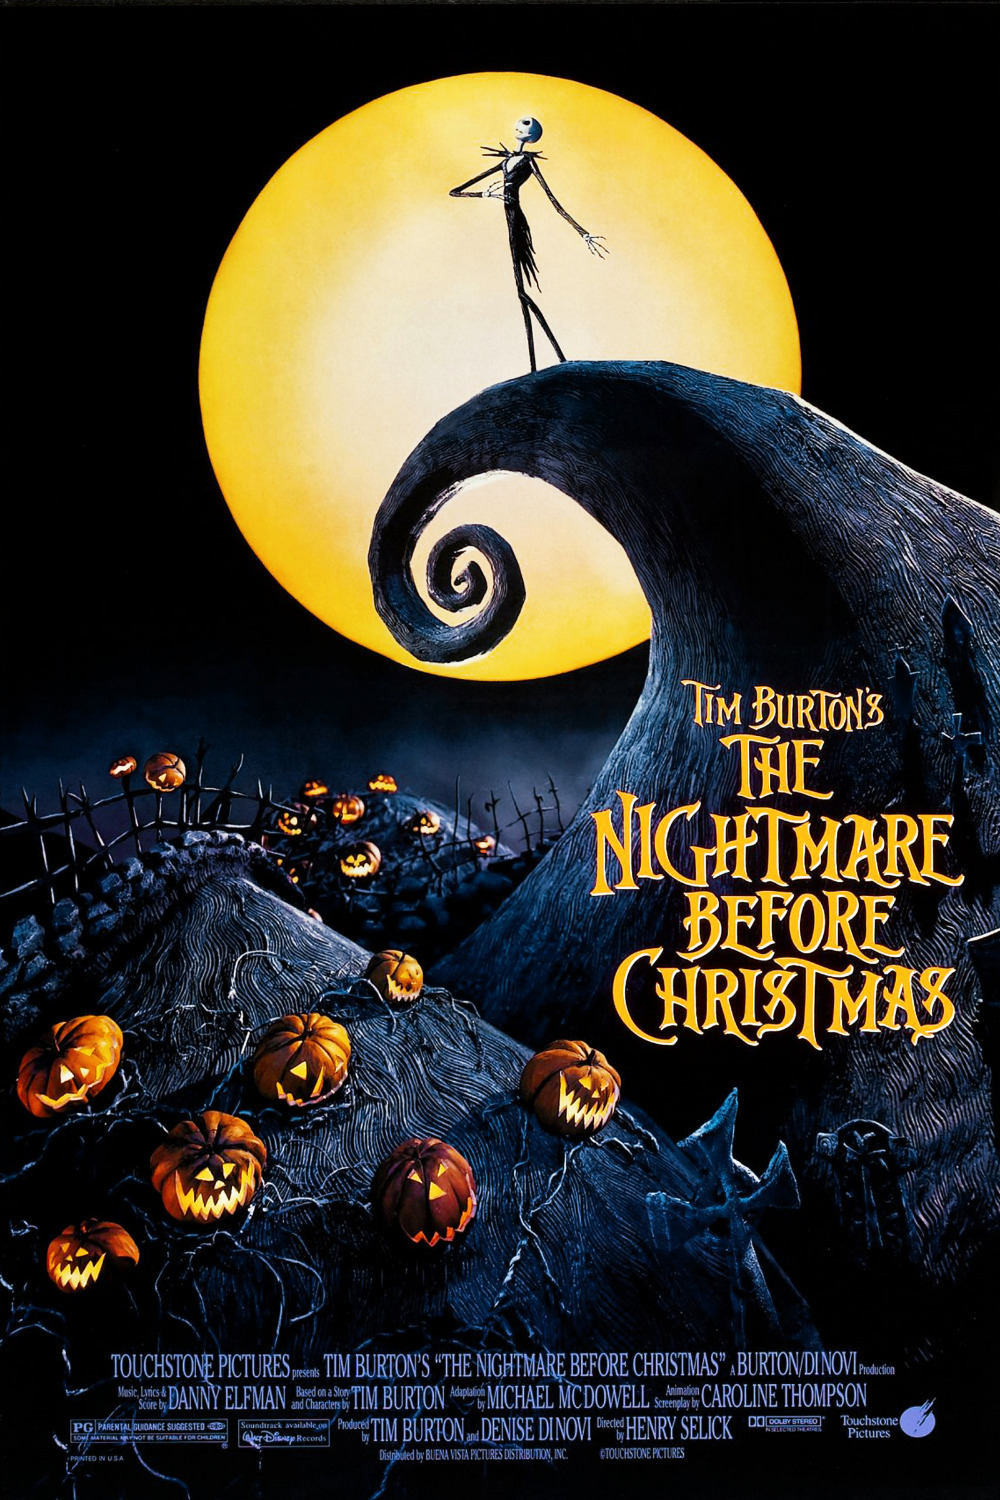 The Nightmare Before Christmas official movie poster featuring Jack Skellington singing on Spiral Hill with the moon in the background and pumpkins below